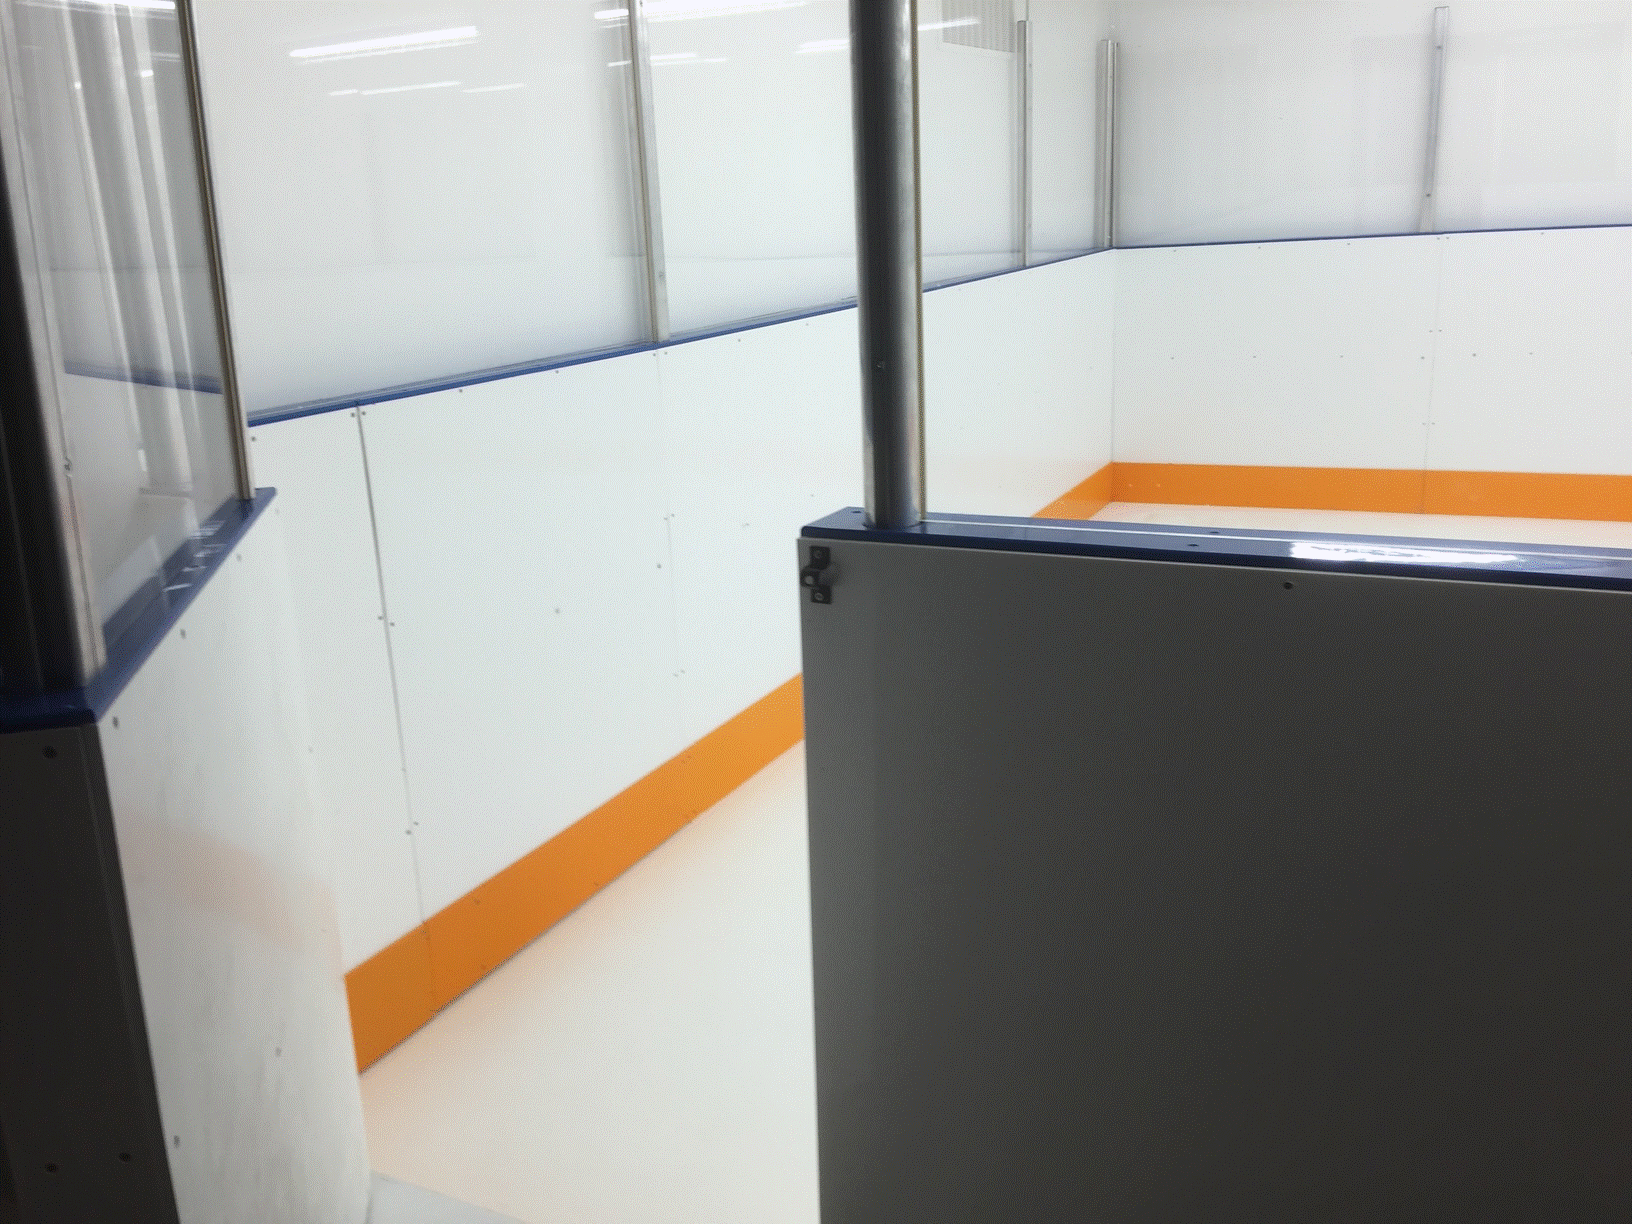 Basement rink with synthetic ice and plexi sheilding